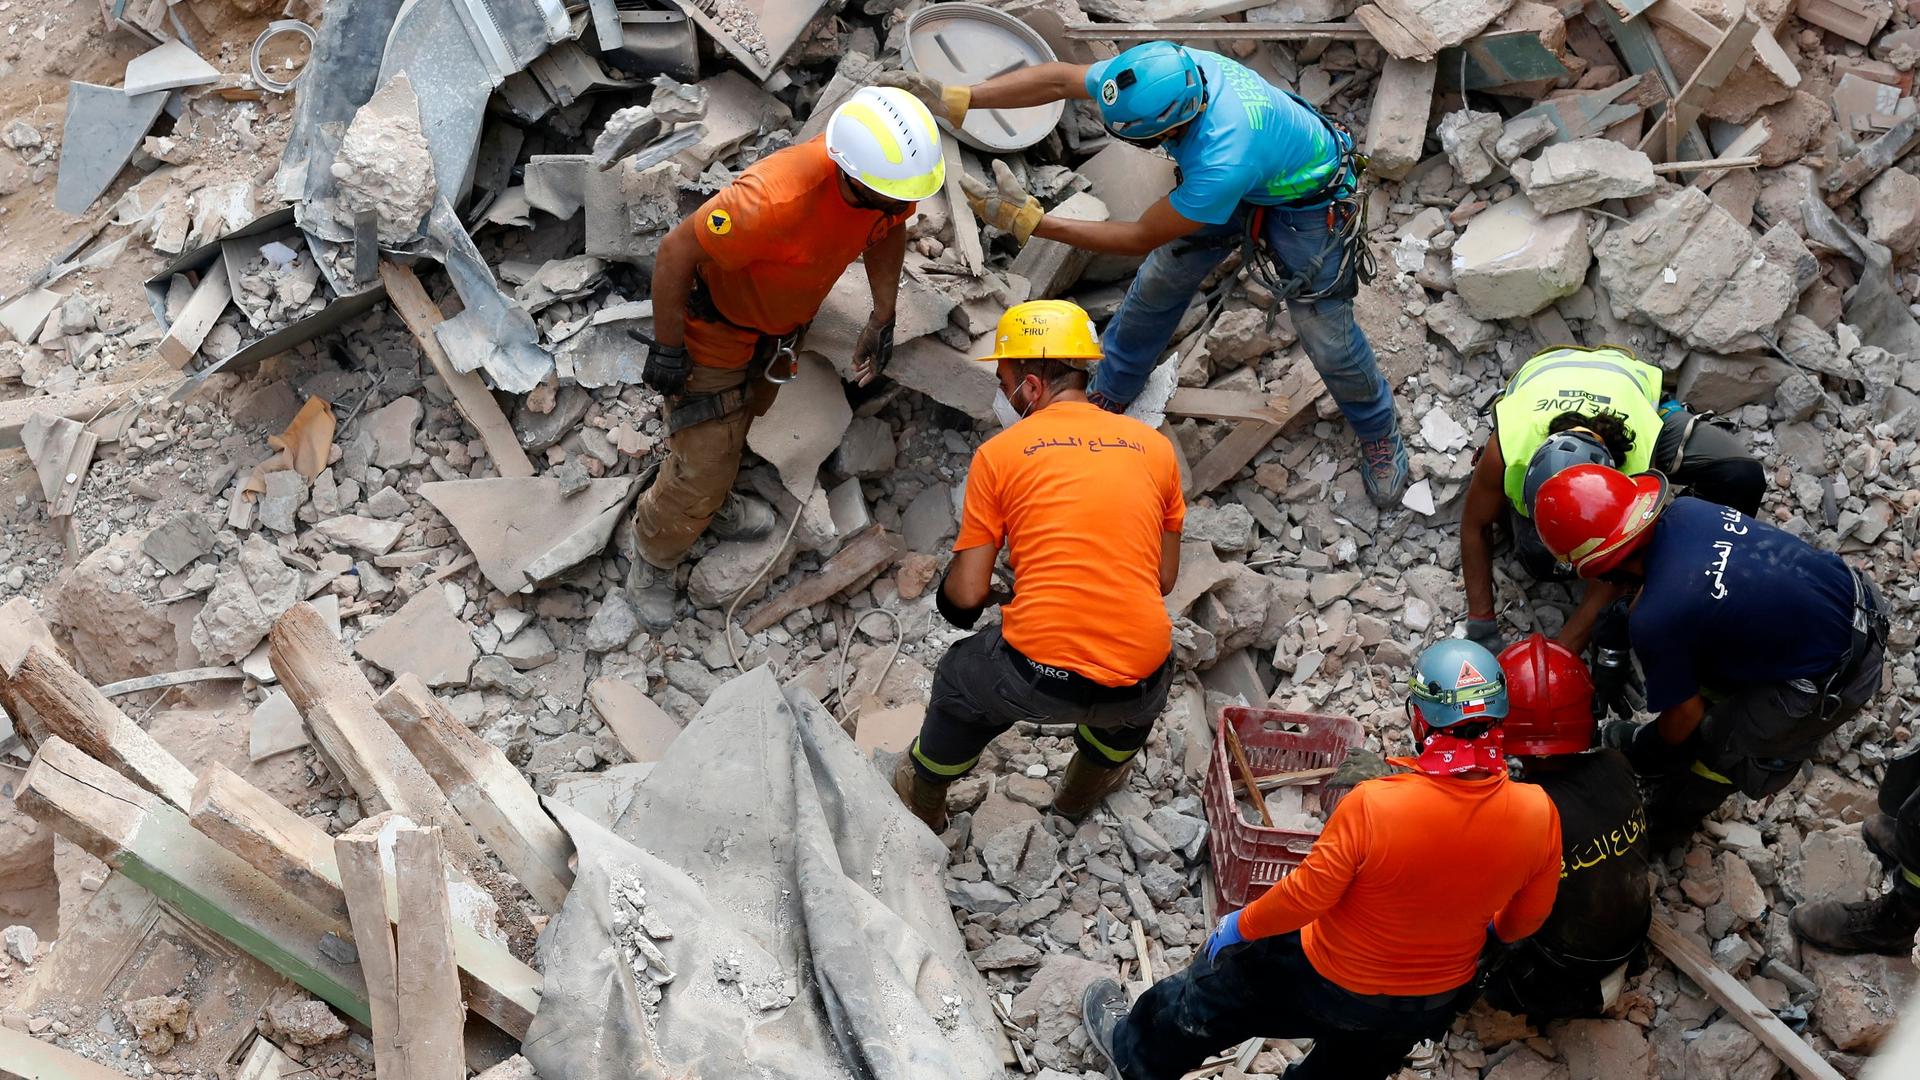 Lebanese and Chilean rescuers search at he site of a collapsed building after getting signals there may be a survivor under the rubble, in Beirut, Lebanon, Sept. 4, 2020.